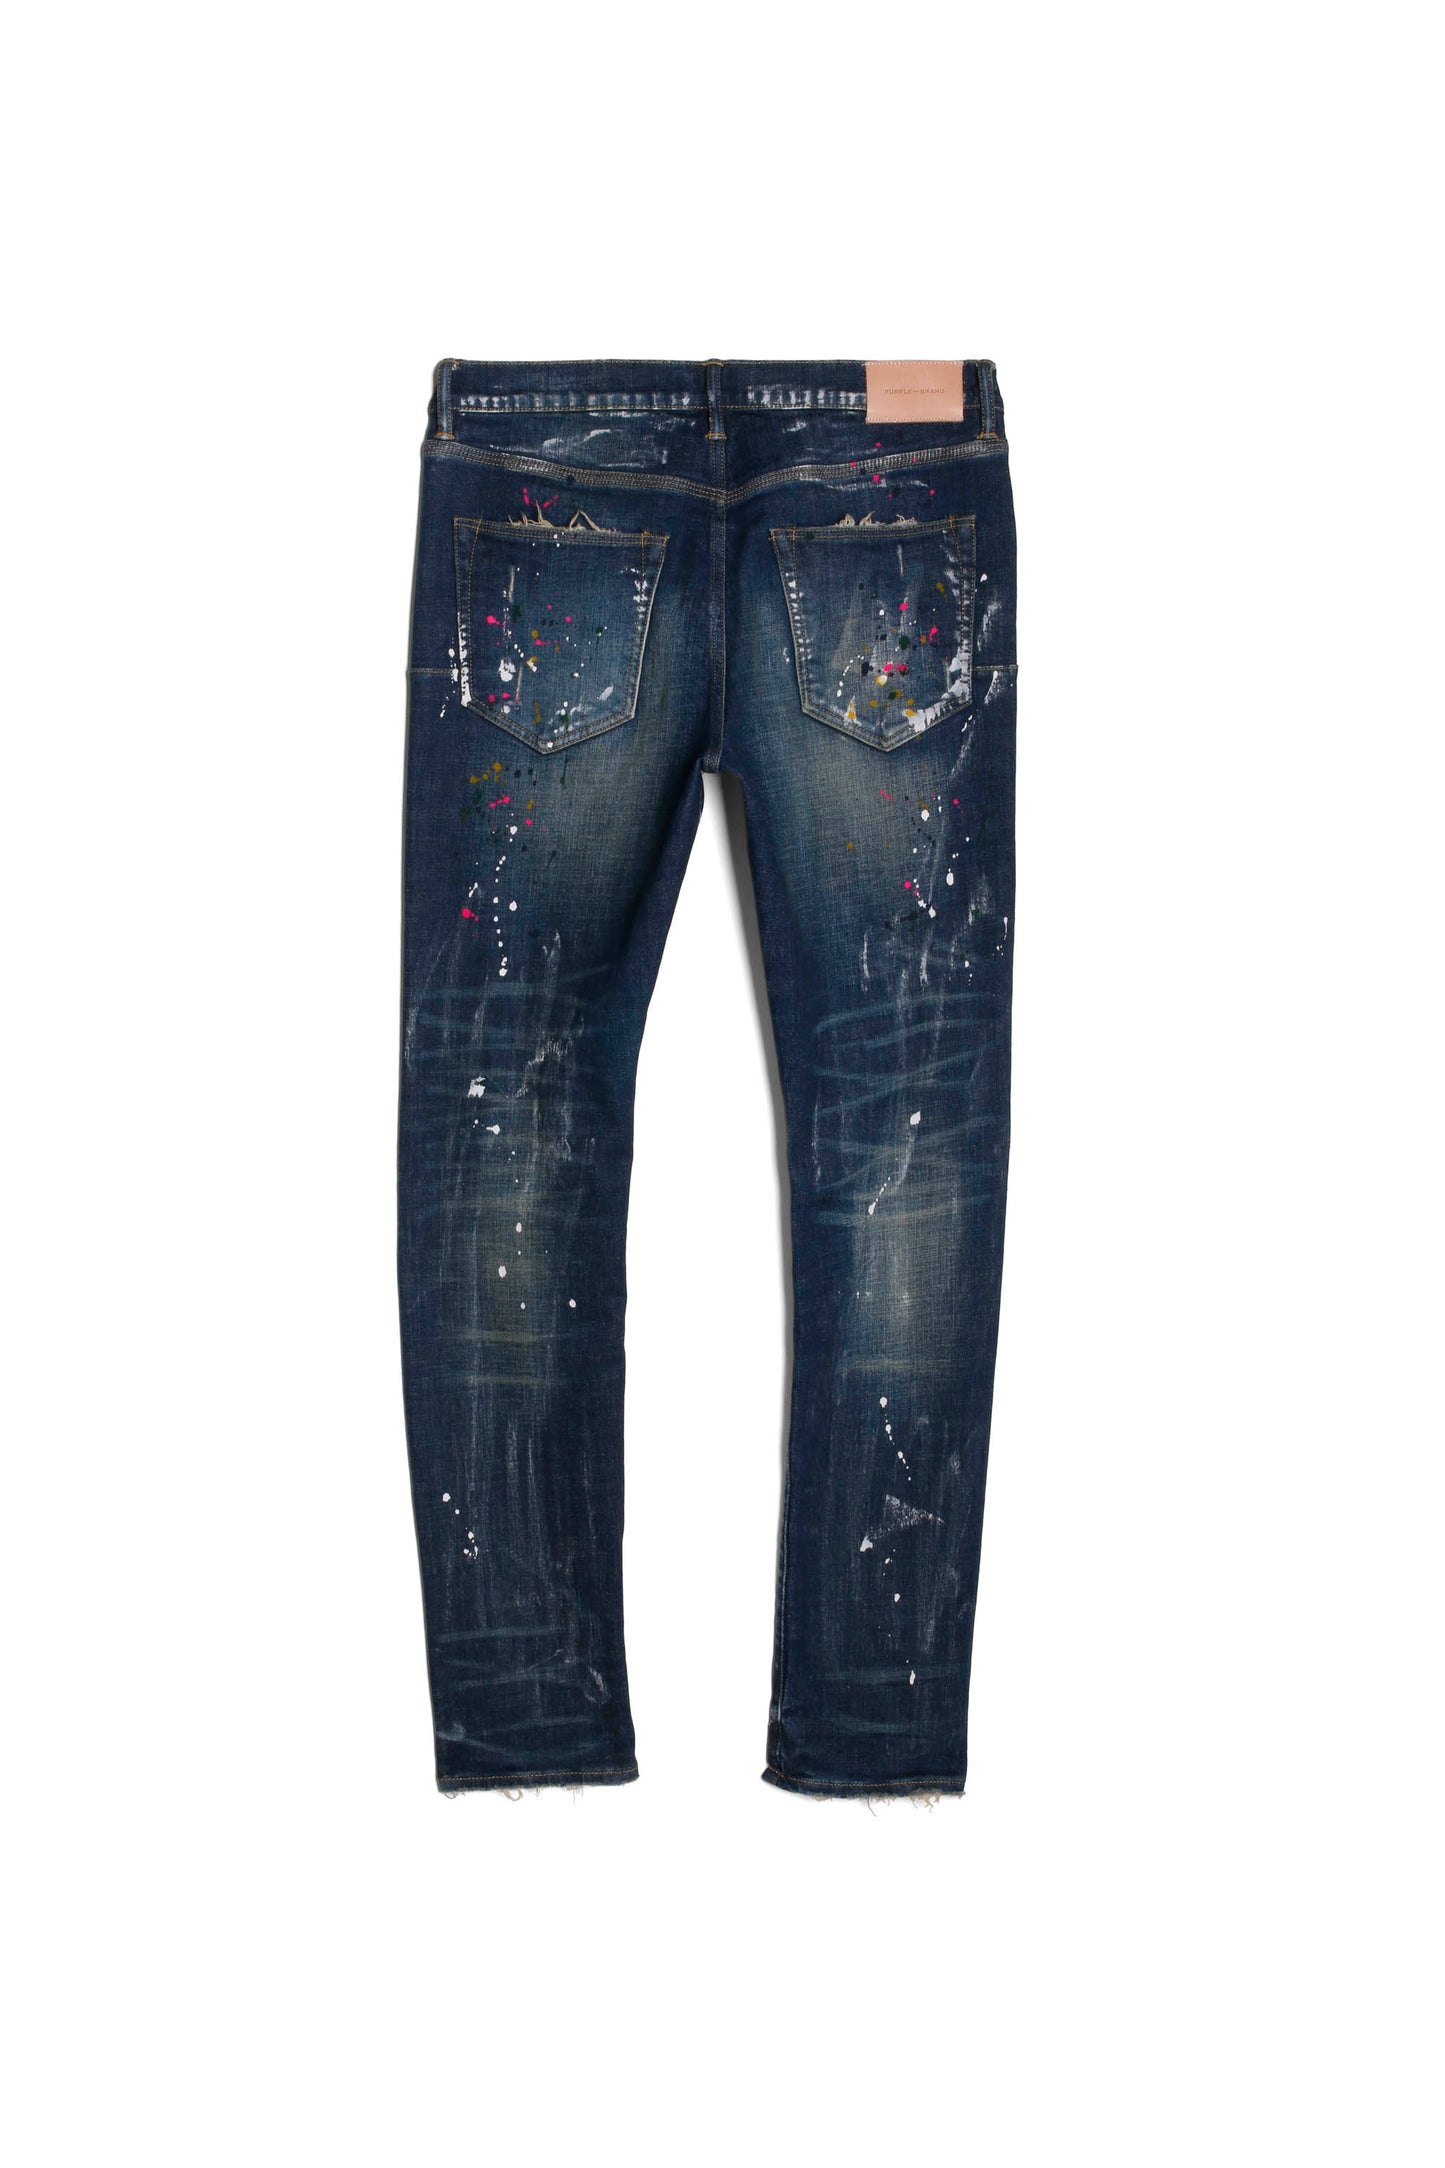 Purple-Brand Jeans - Stitches And Patches - Blue - P003 – Dabbous